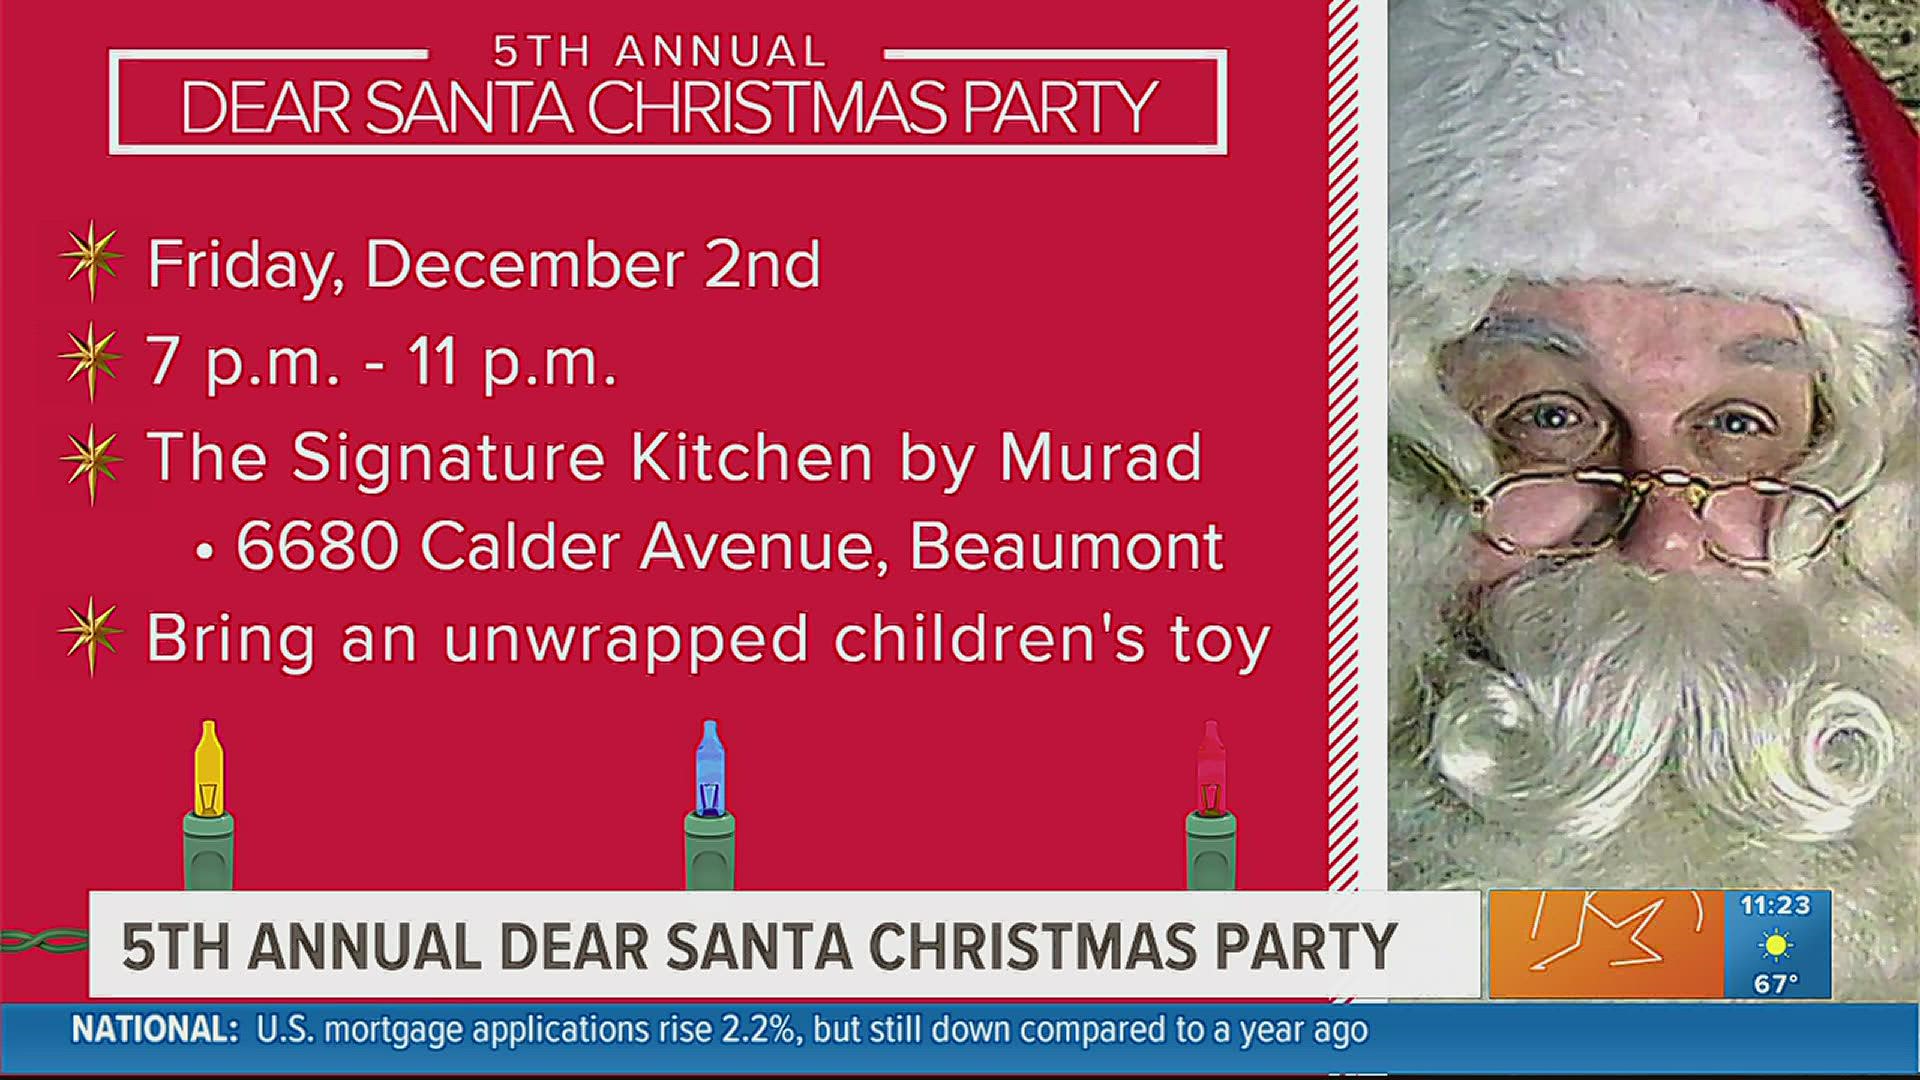 Guests are encouraged to bring an unwrapped children's toy to be donated to pediatric patients at St. Elizabeth Hospital.